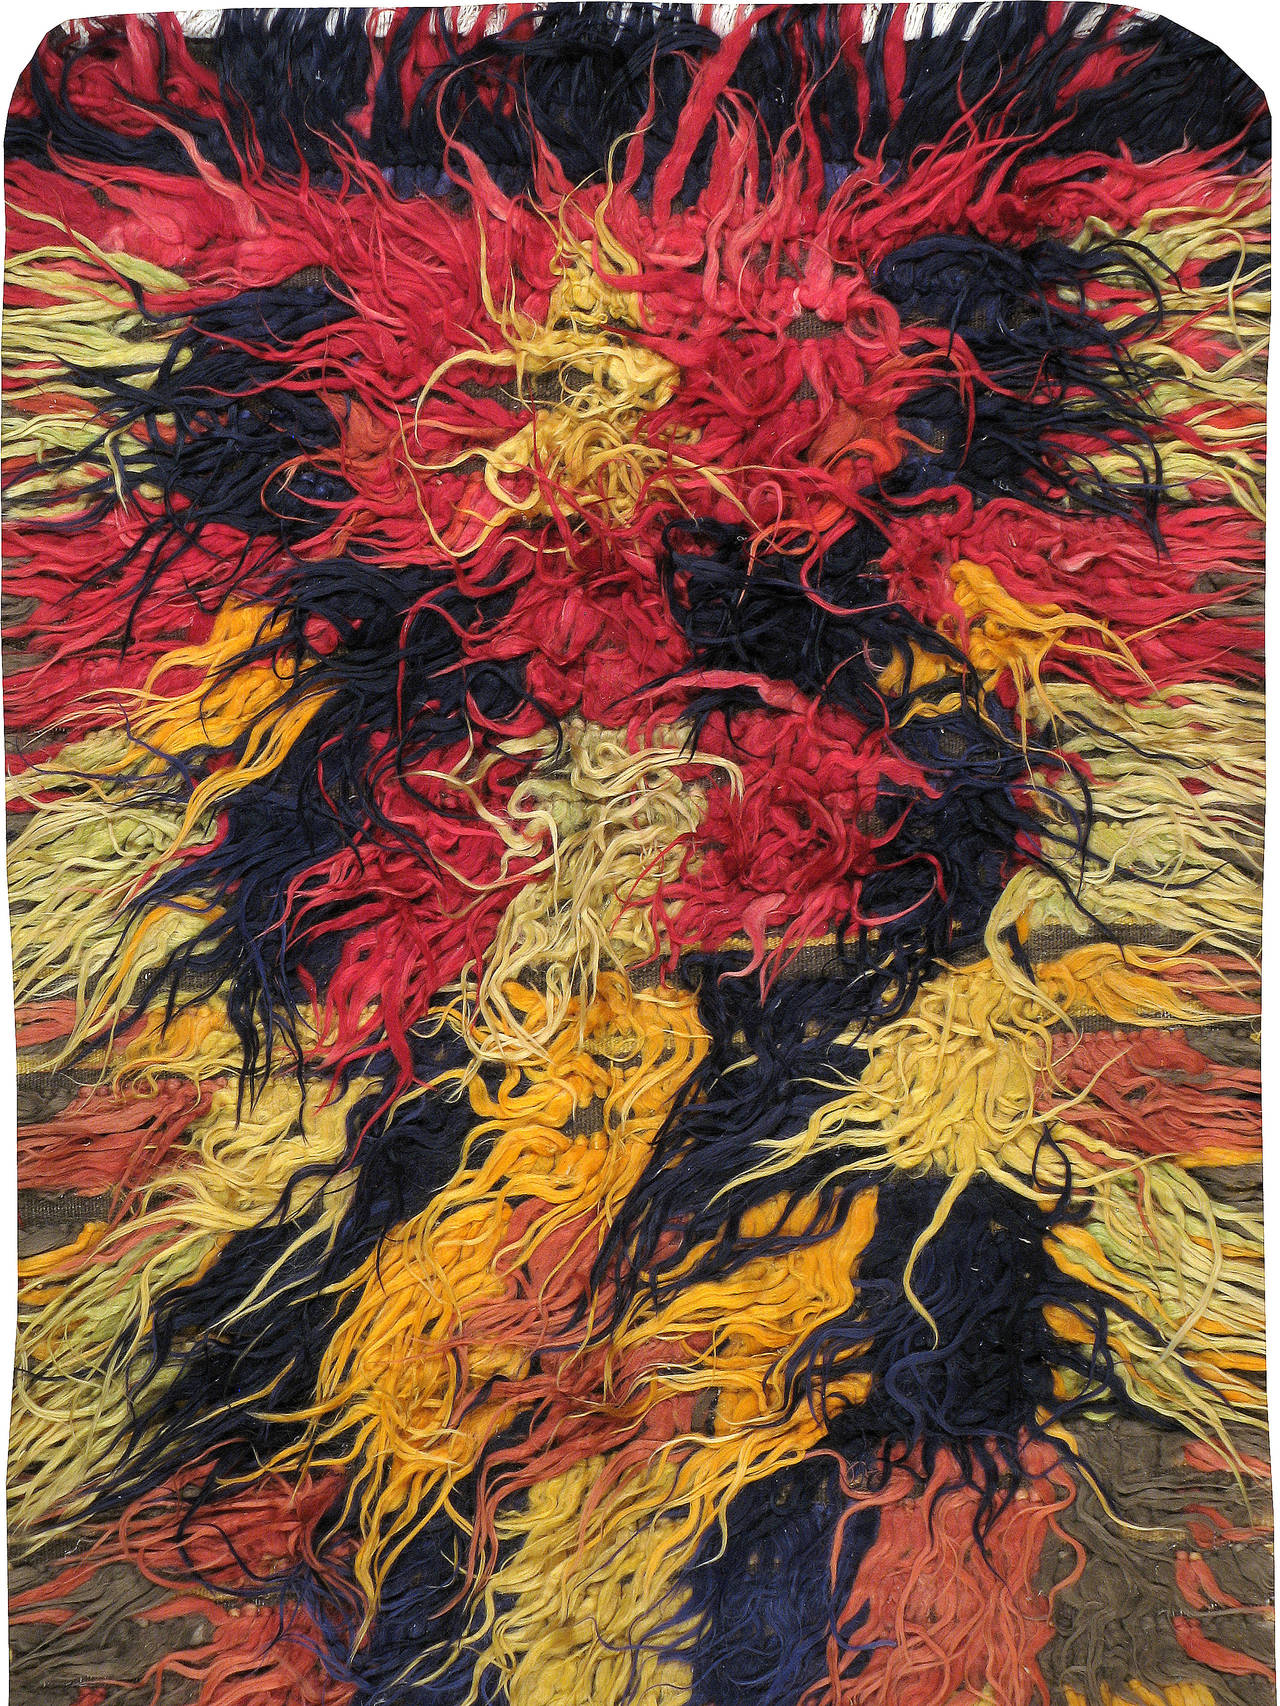 A vintage Turkish Tulu carpet from the second quarter of the 20th century.